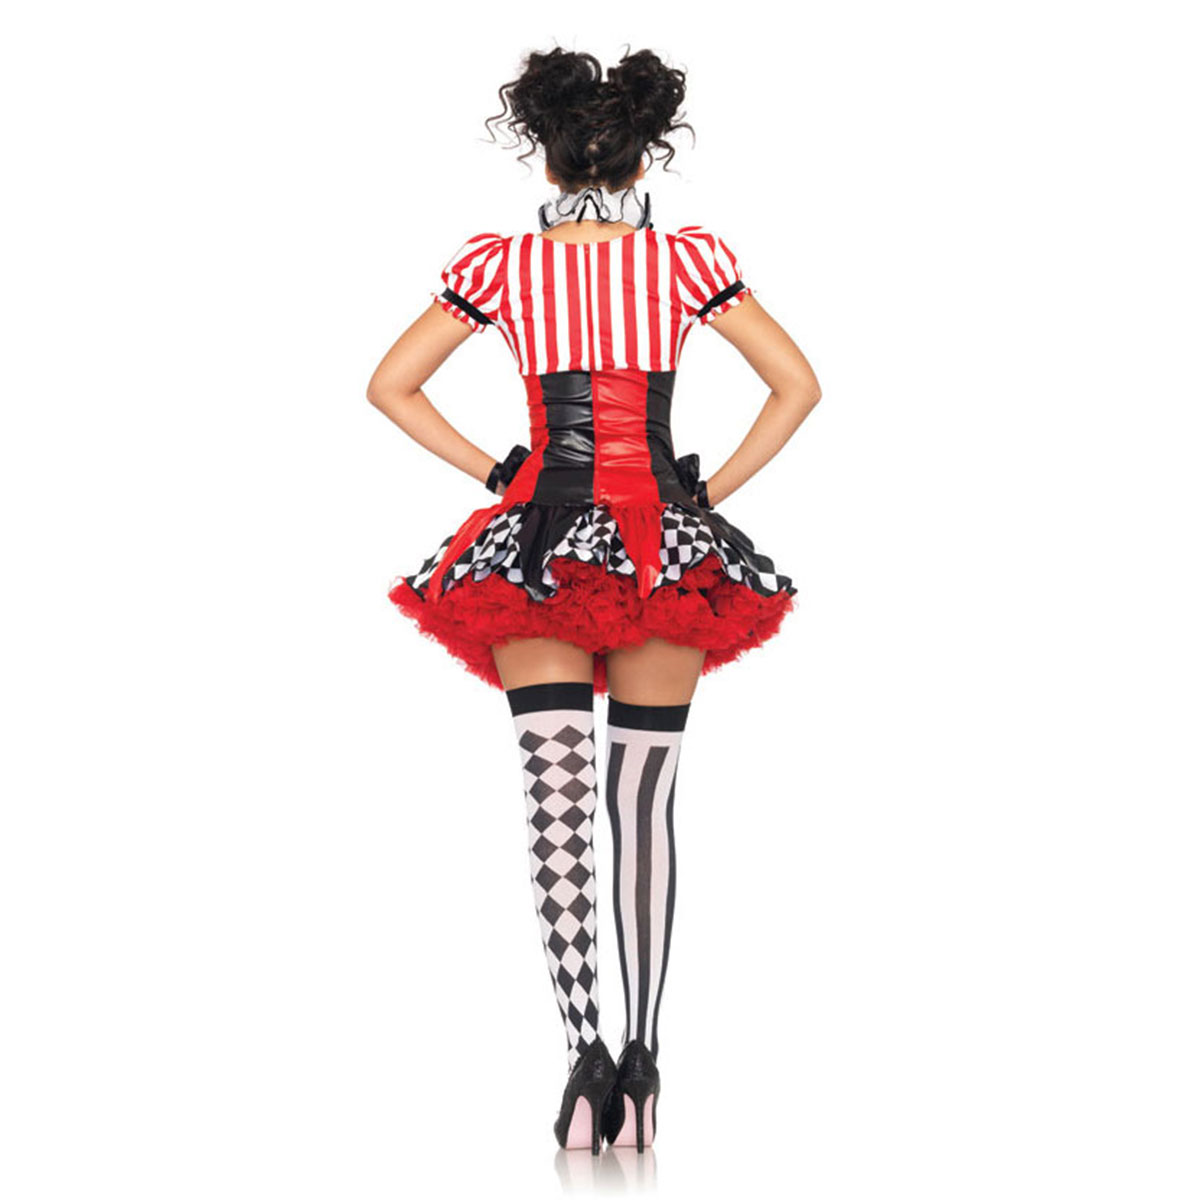 Sexy Le Belle Harlequin Circus Clown Gras Women S Adult Halloween